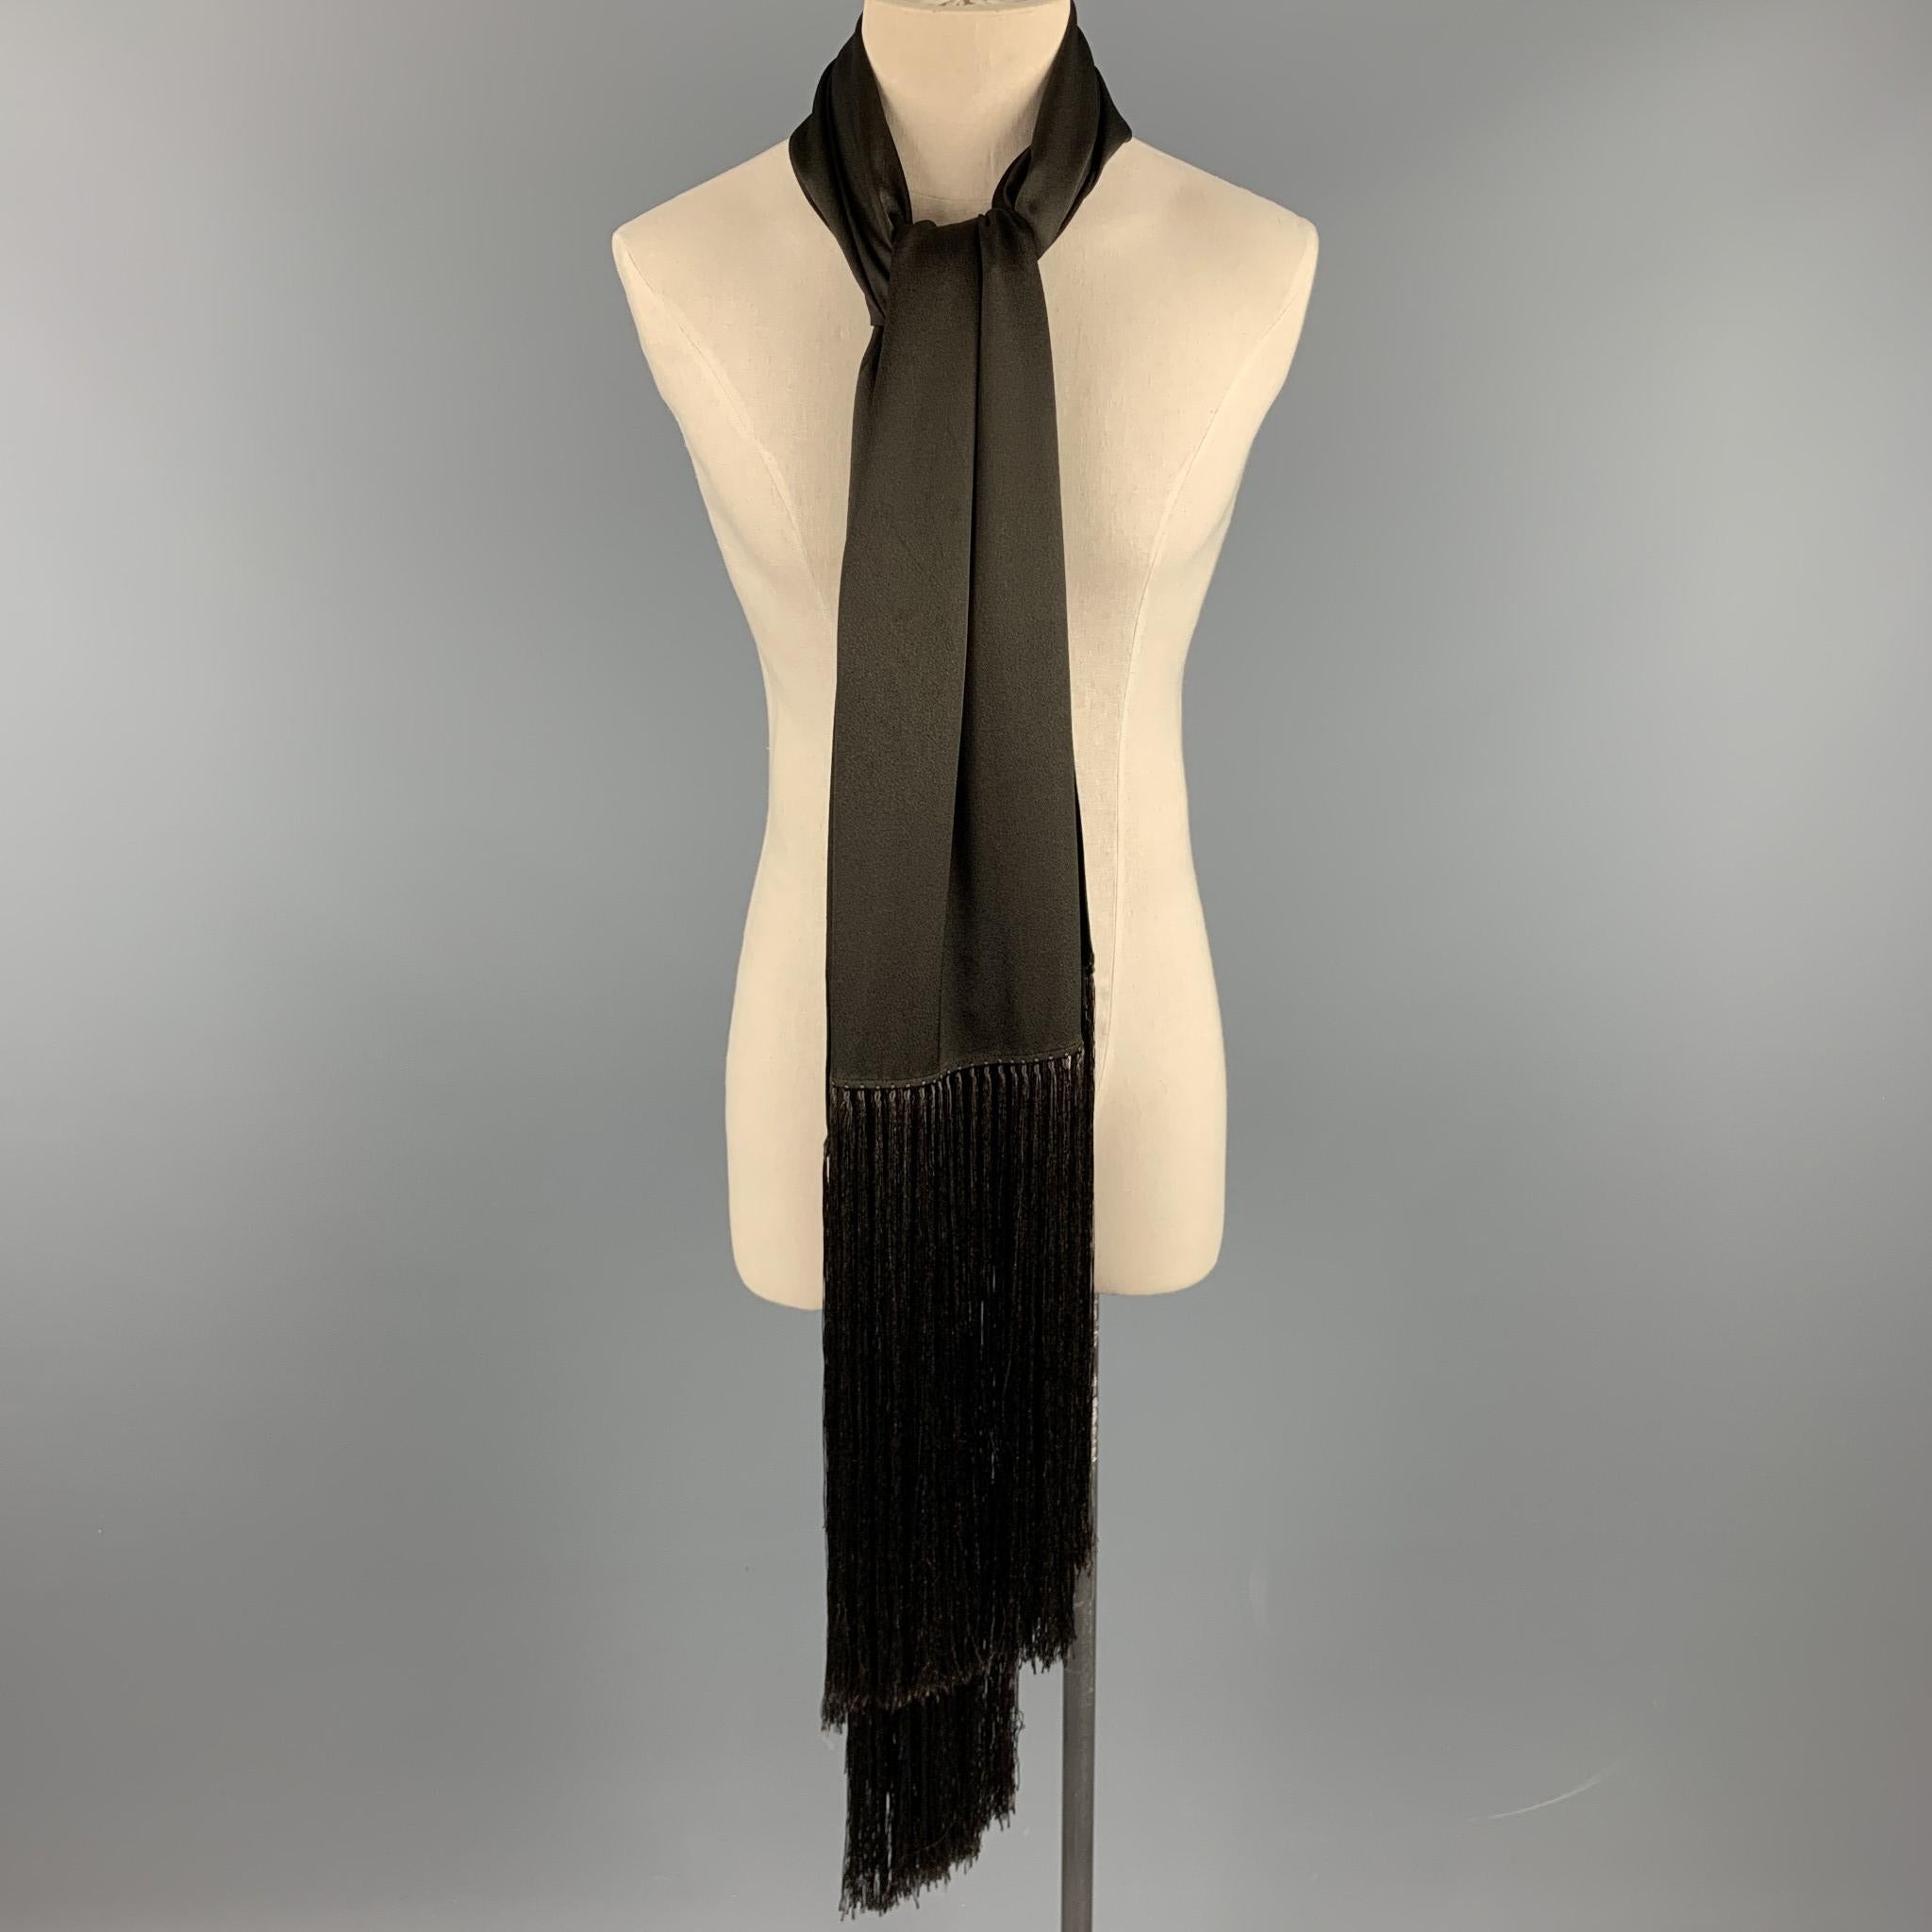 JOHN GALLIANO scarf comes in a brown solid fabric with sixteen and a half fringe trim. 

Excellent Pre-Owned Condition.

Measurements:

70 in. x 27 in. 